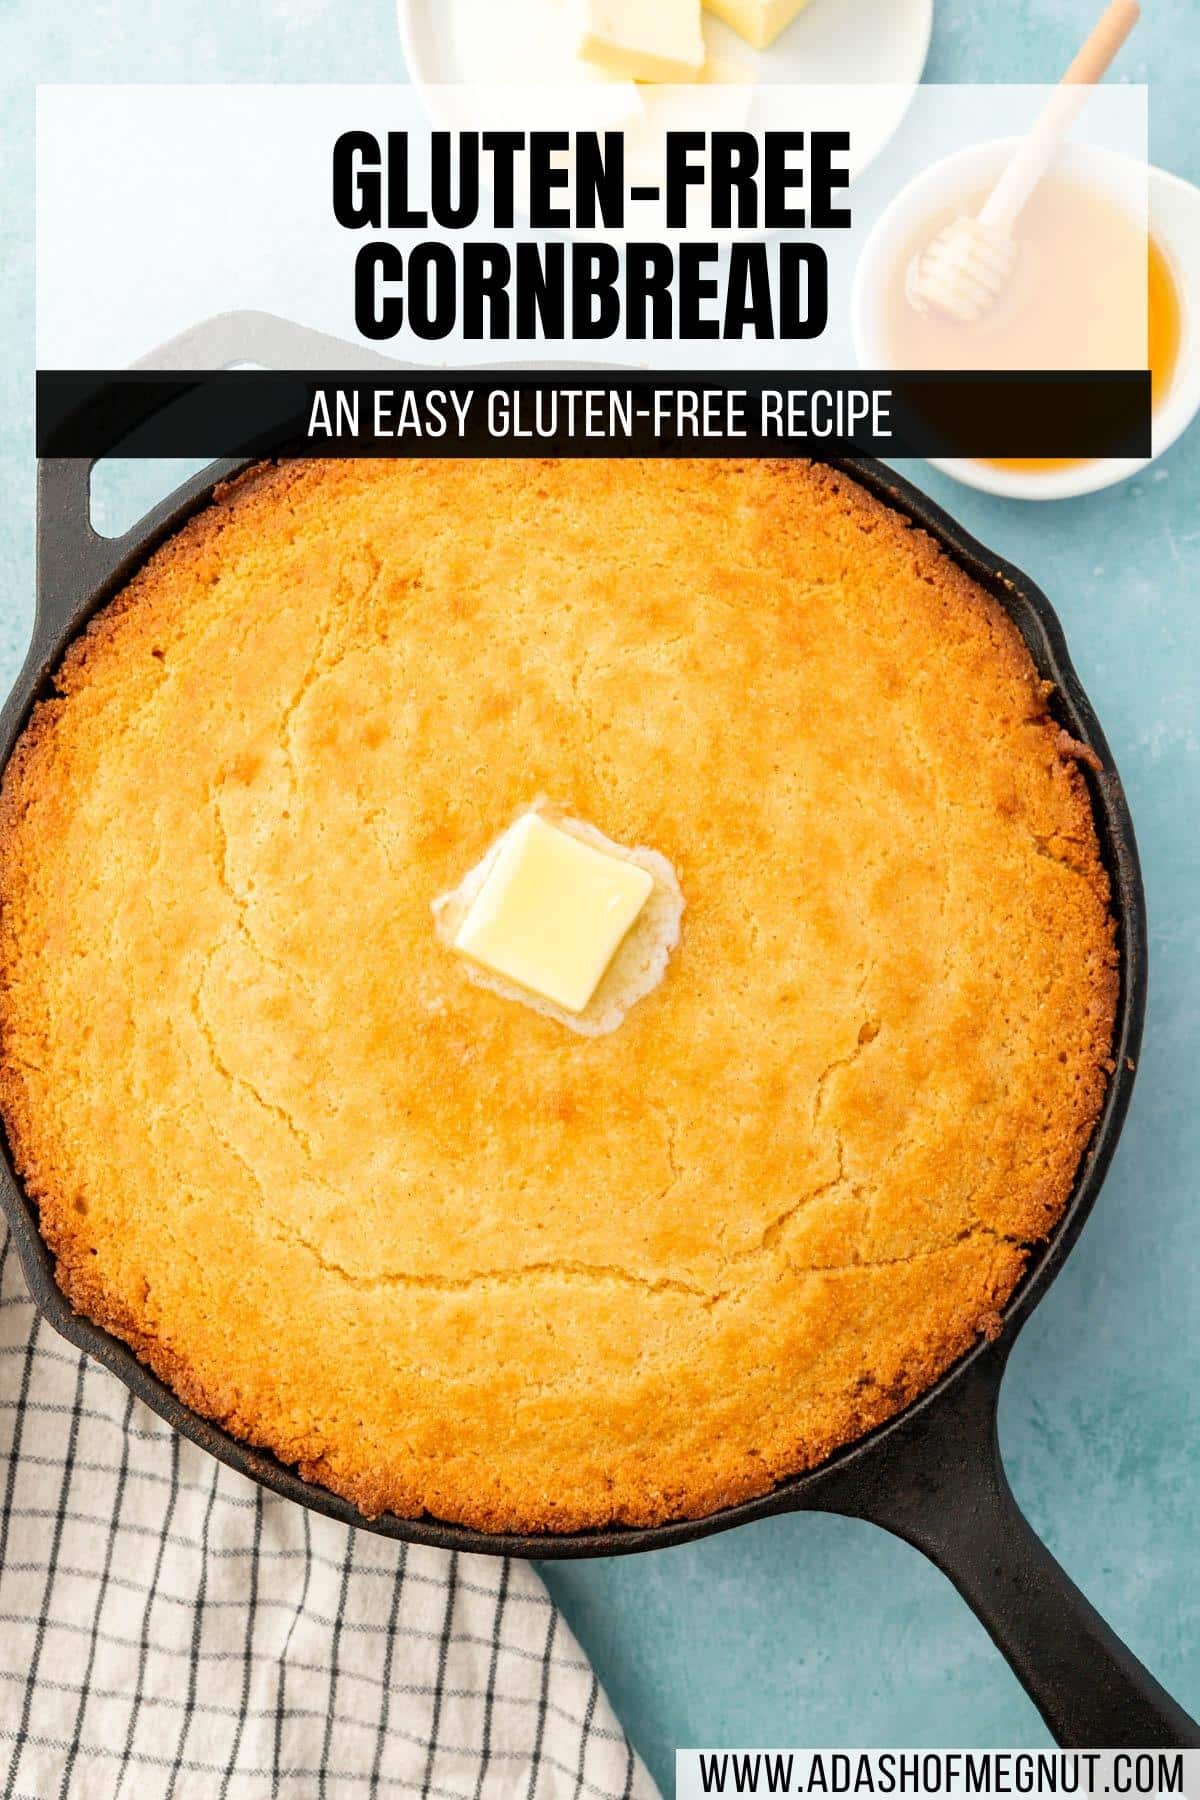 A cast iron skillet filled with gluten-free cornbread with a pat of melted butter on top with a text overlay over the image.